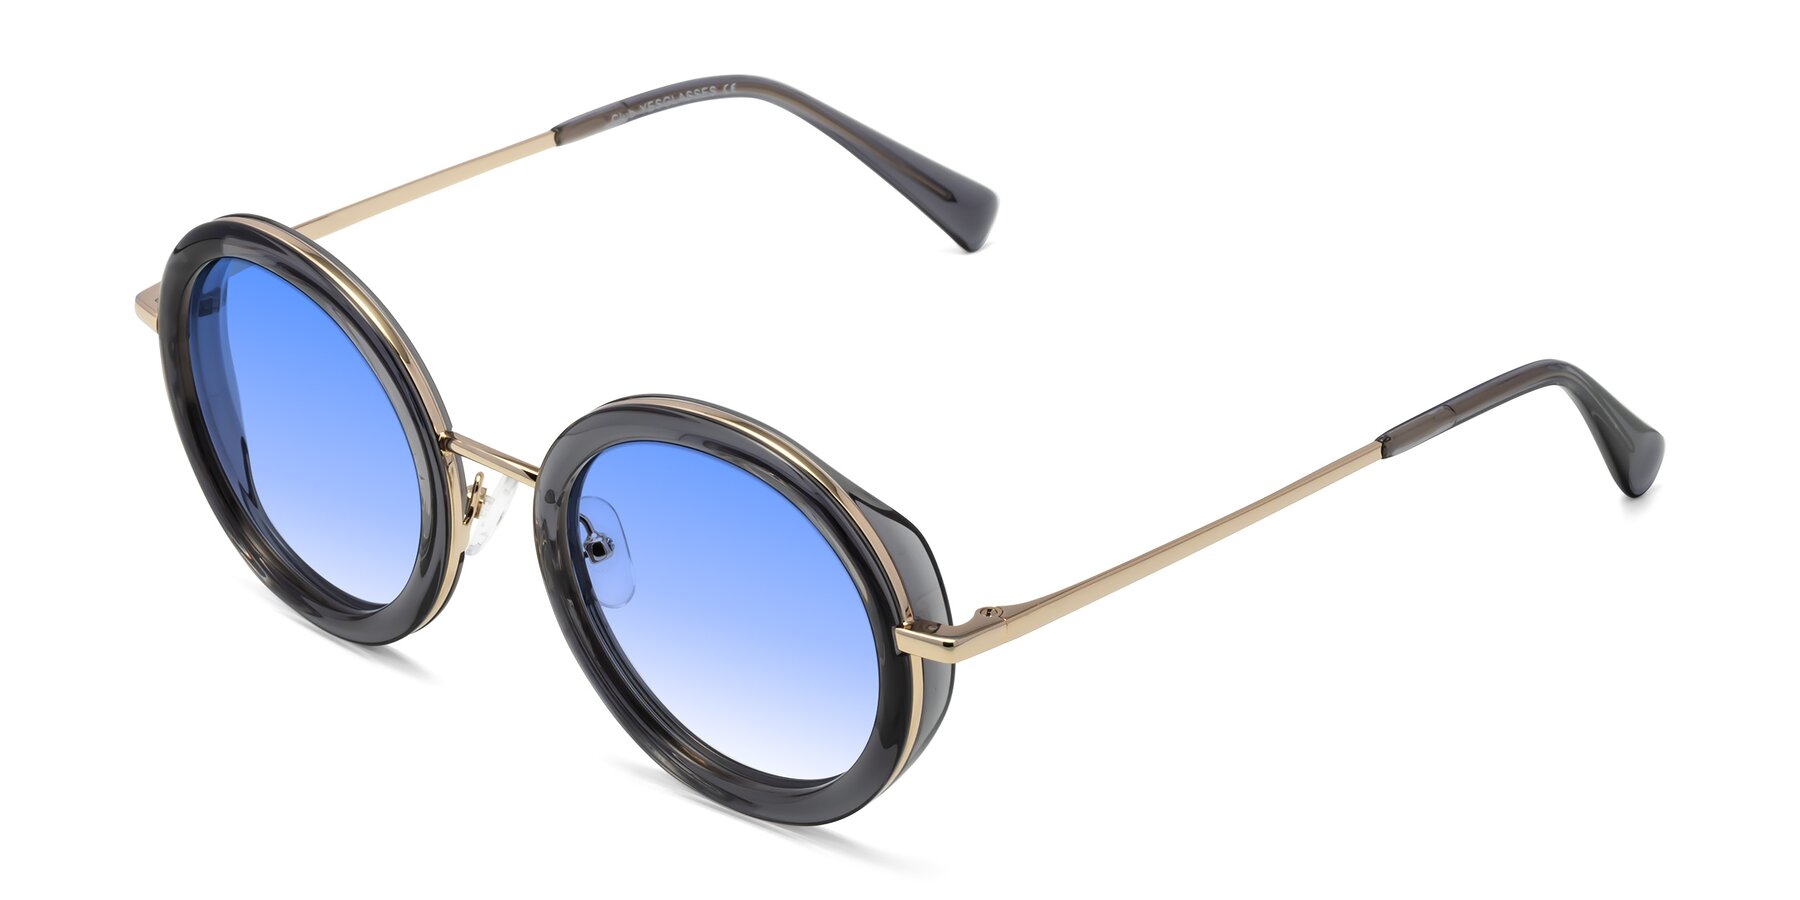 Angle of Club in Gray-Gold with Blue Gradient Lenses